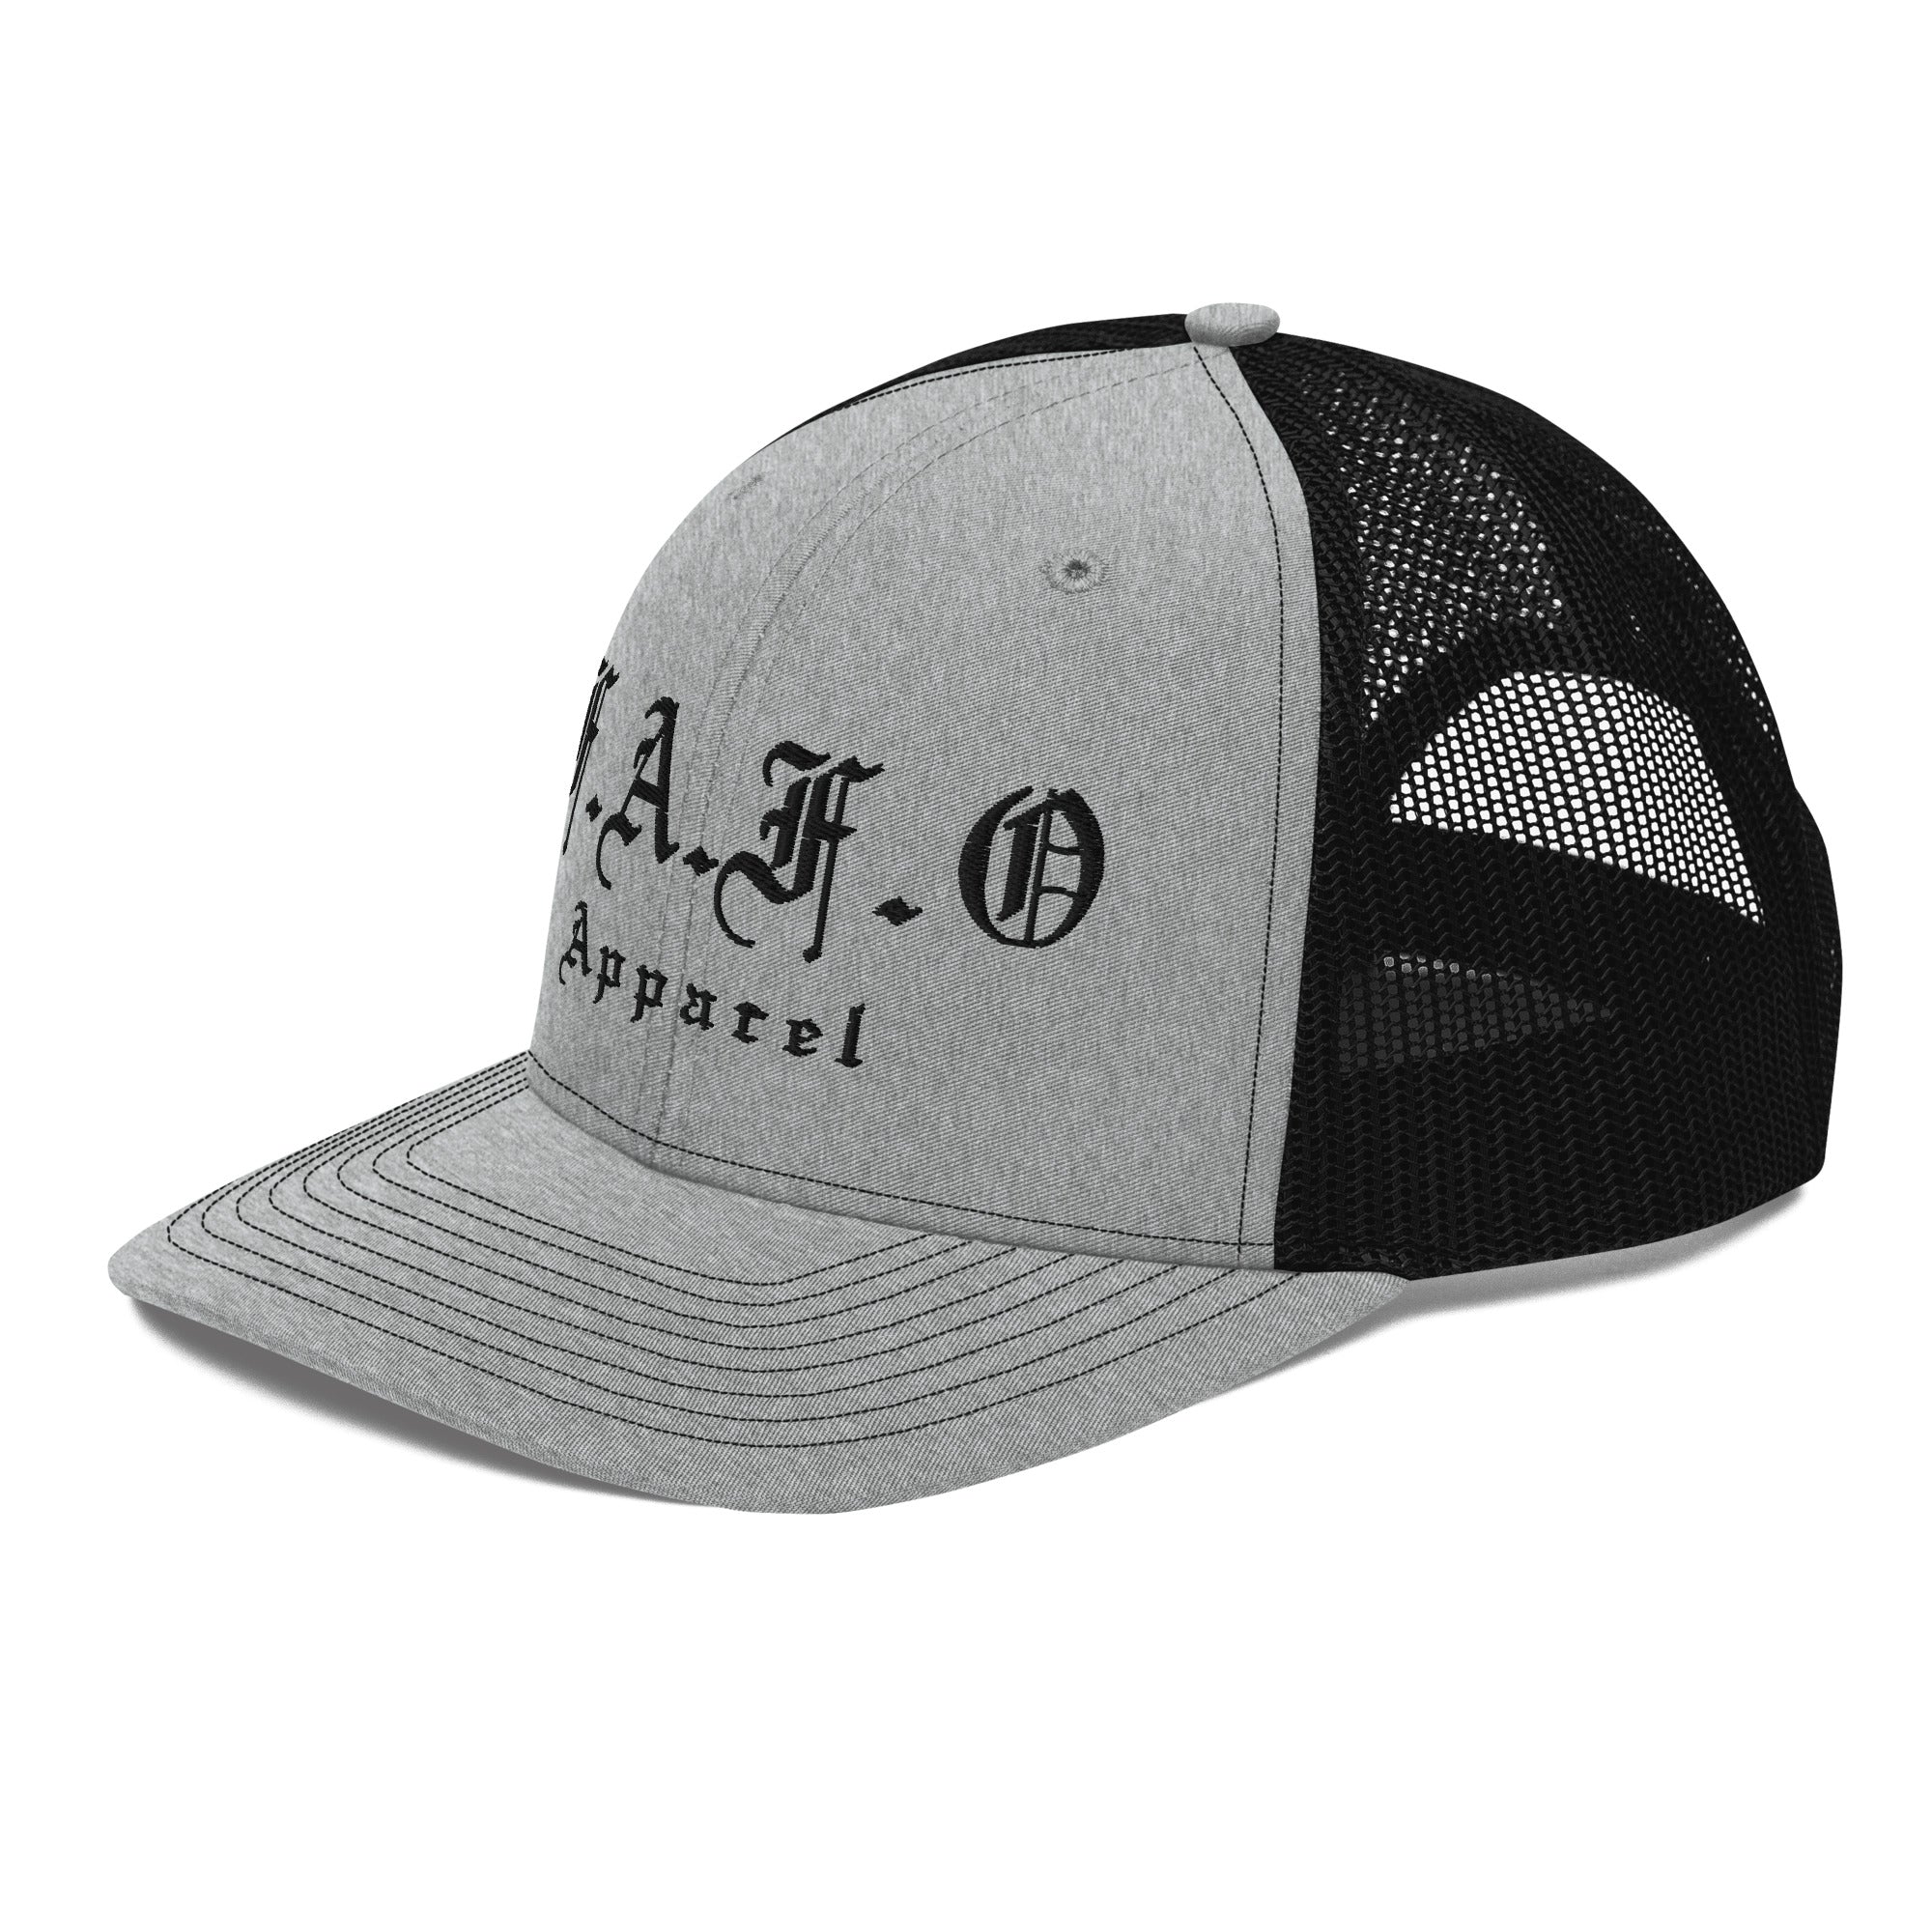 FAFO PVC Patch and American Made Hat Combo – Nine Line Apparel